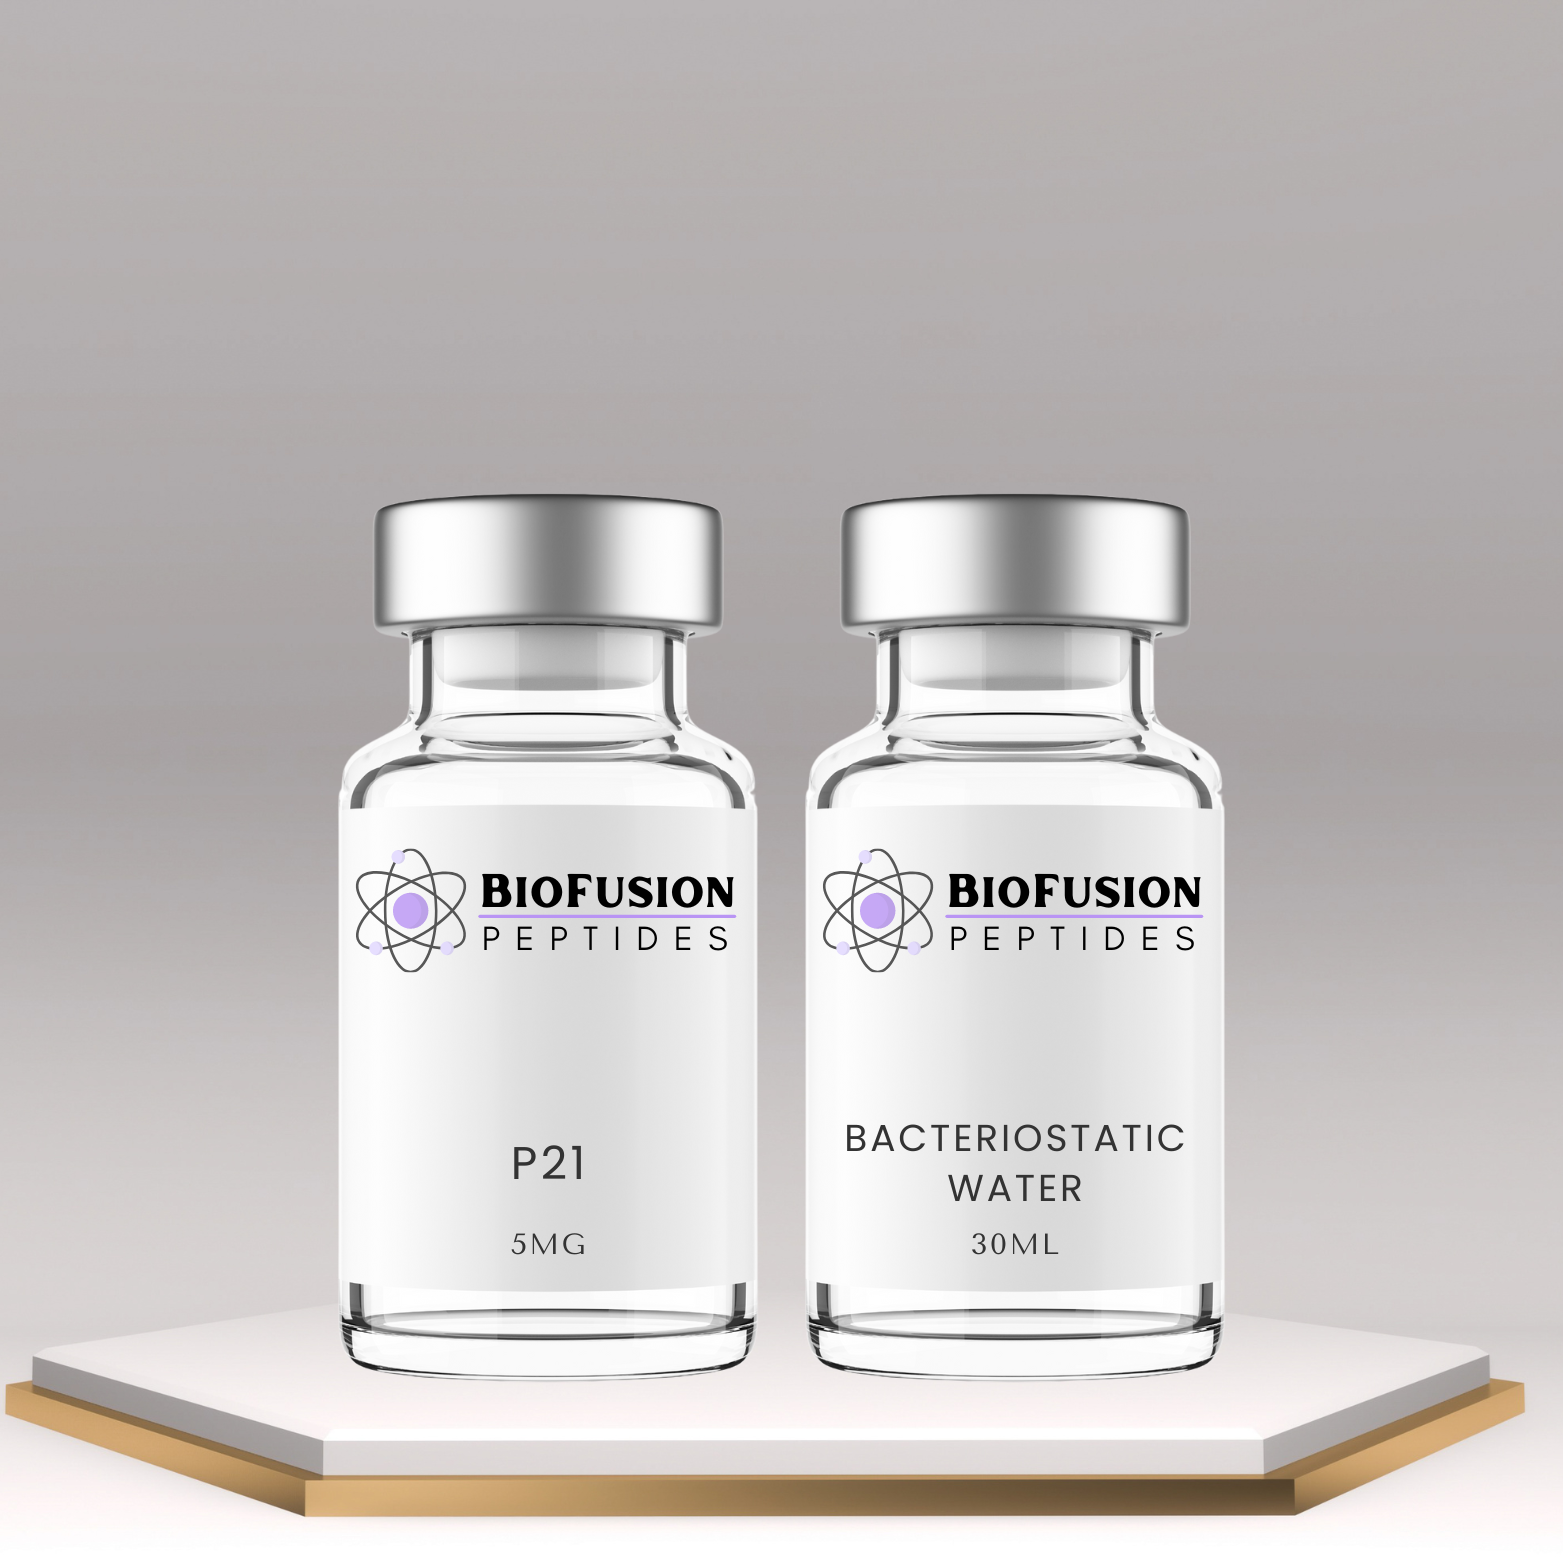 BioFusion Peptides P21 kit with bacteriostatic water